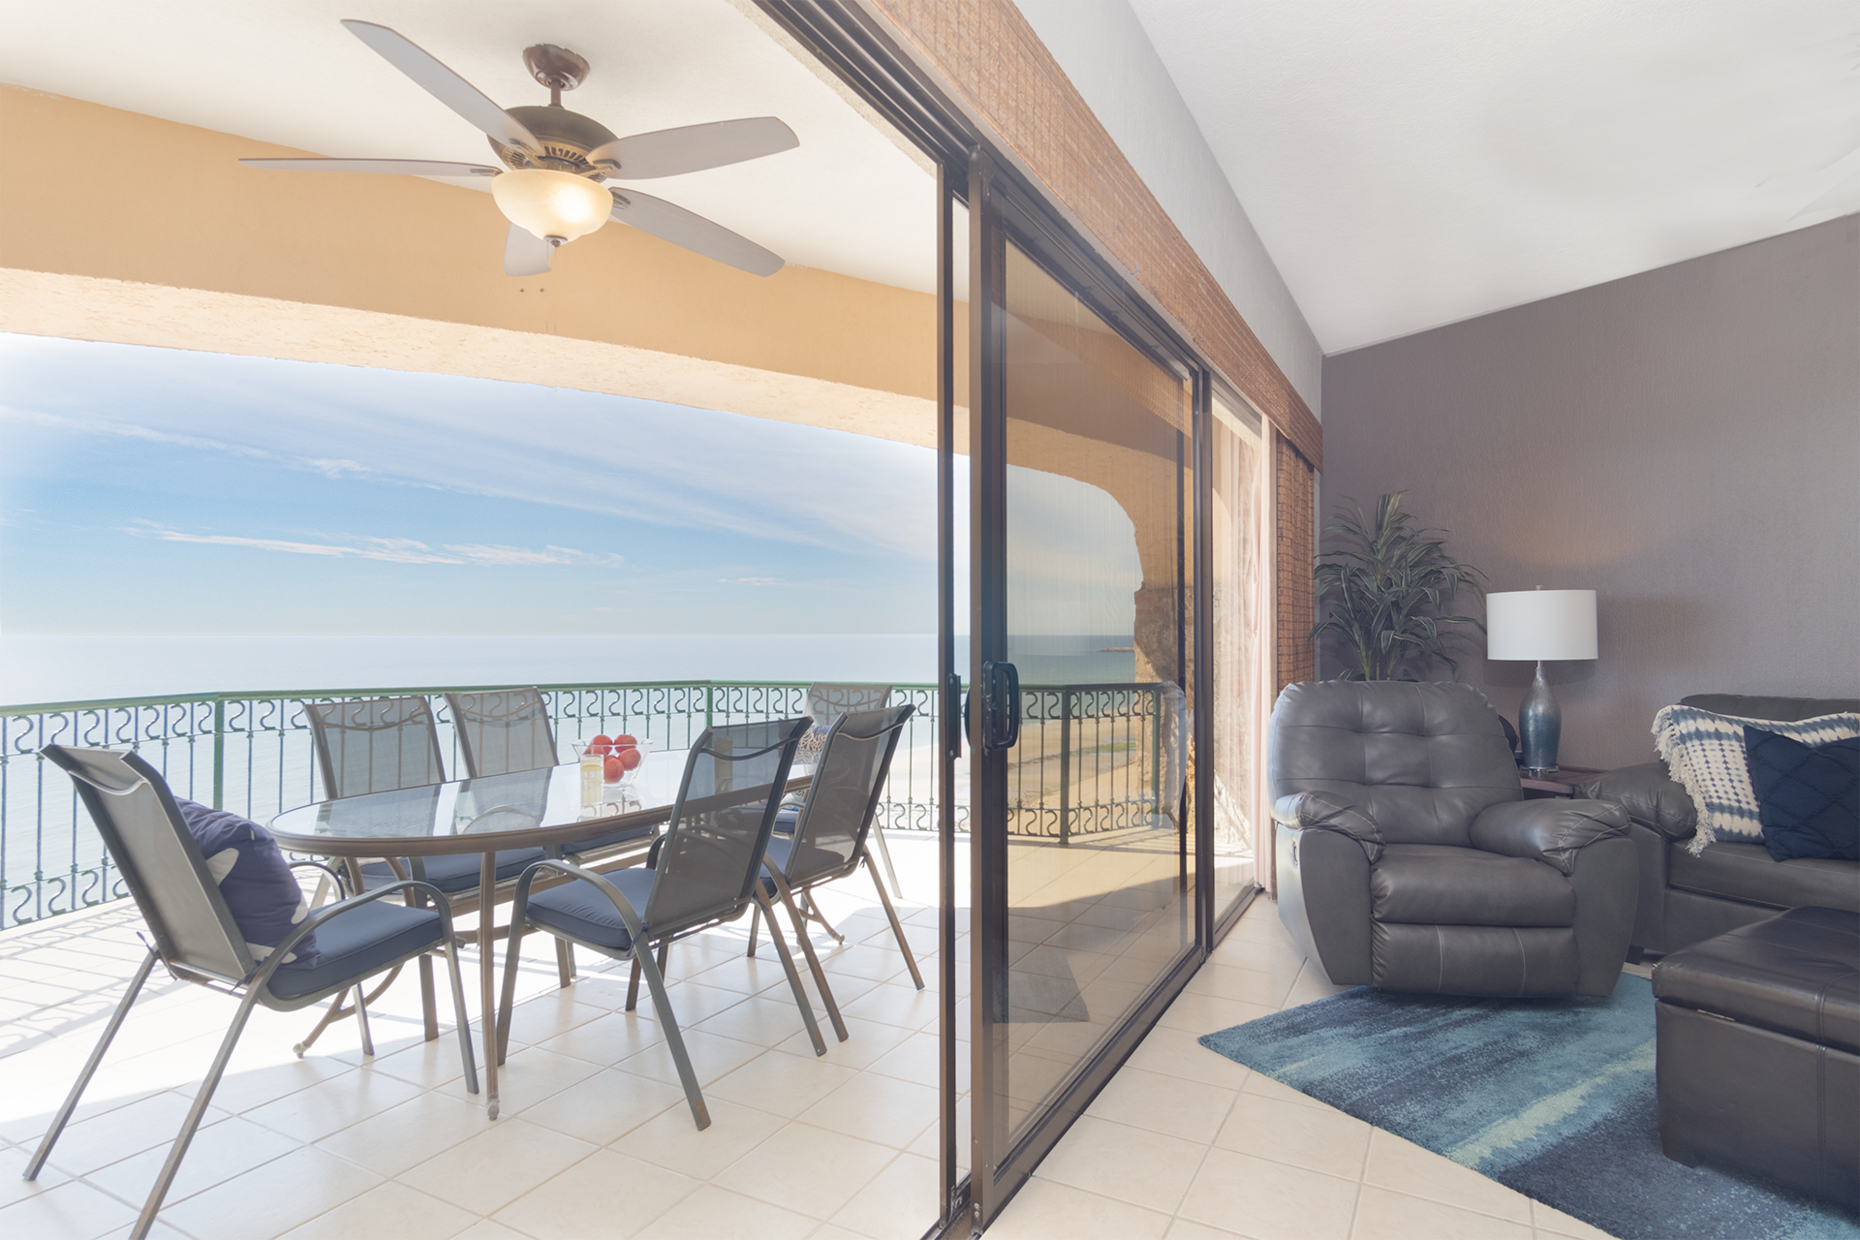 Comfortable seating in the living room with stunning ocean views!